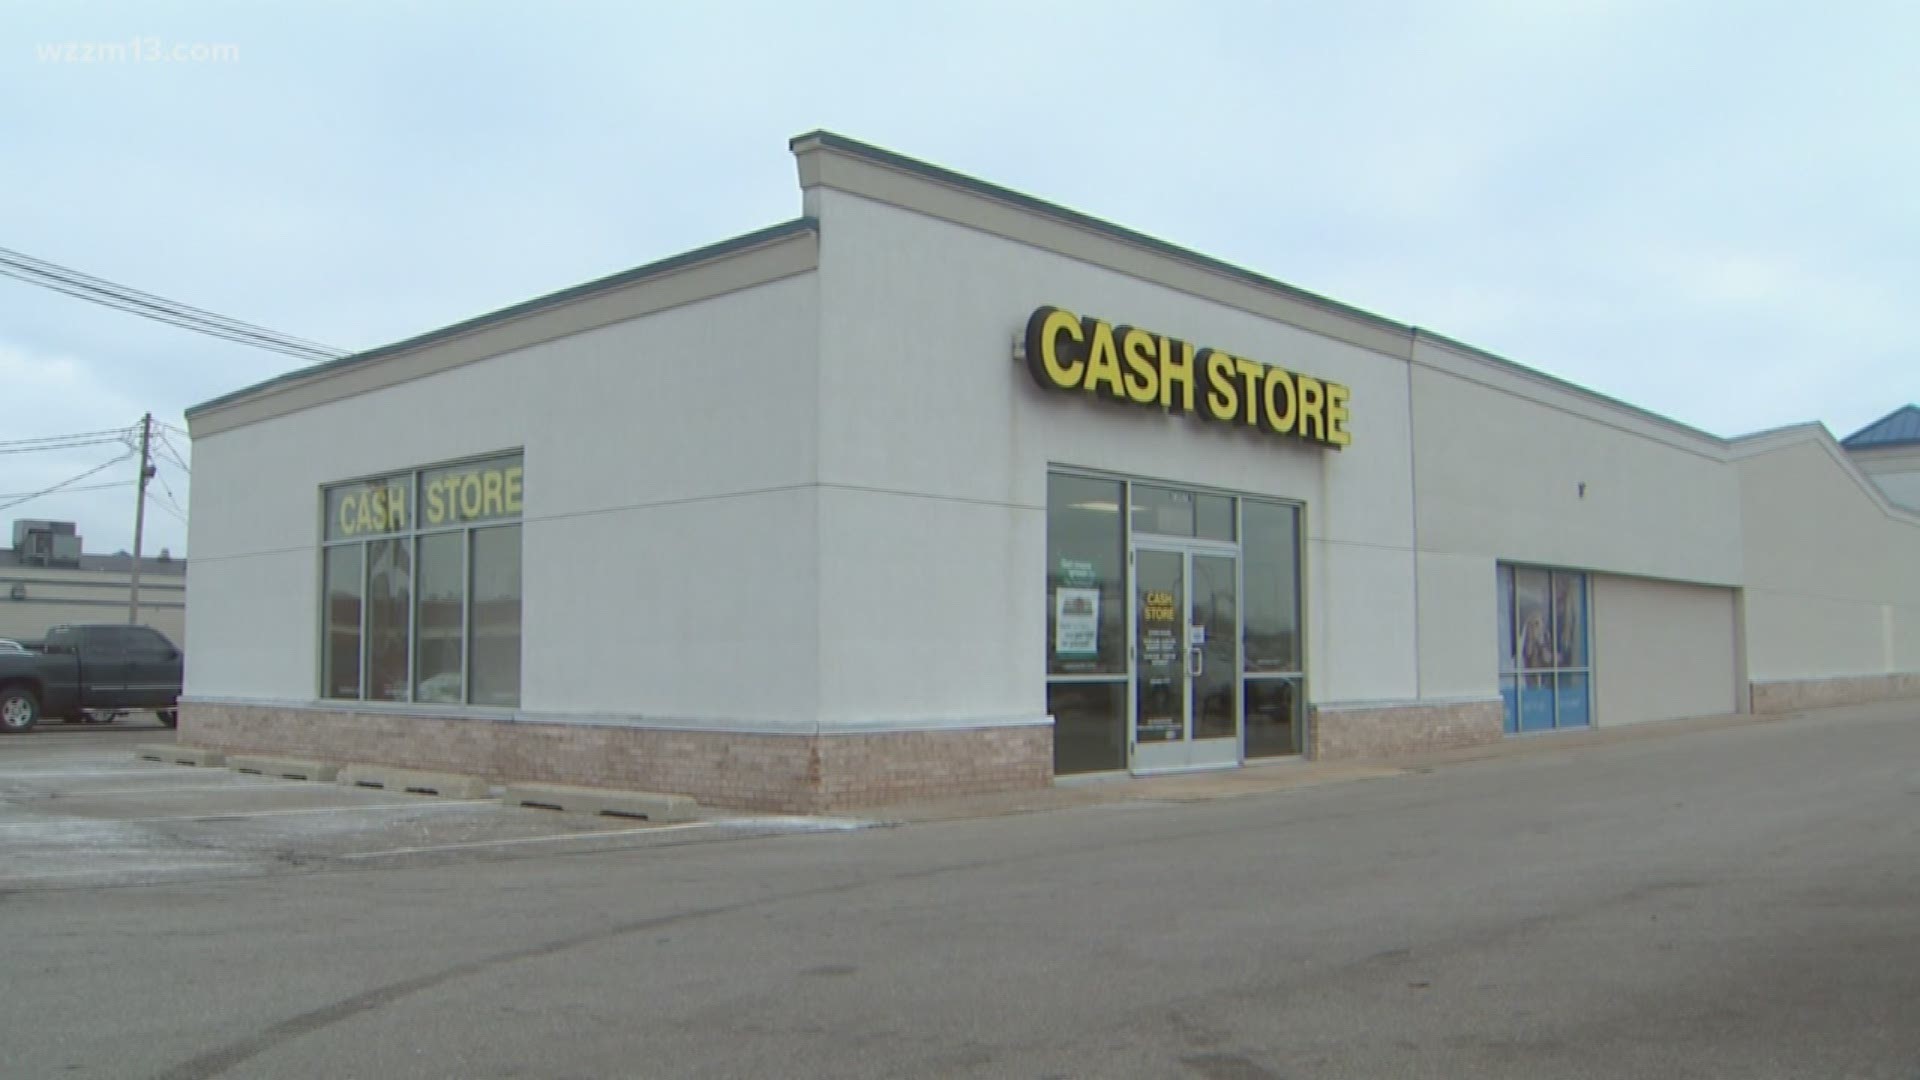 Arrest made in payday lender store robbery